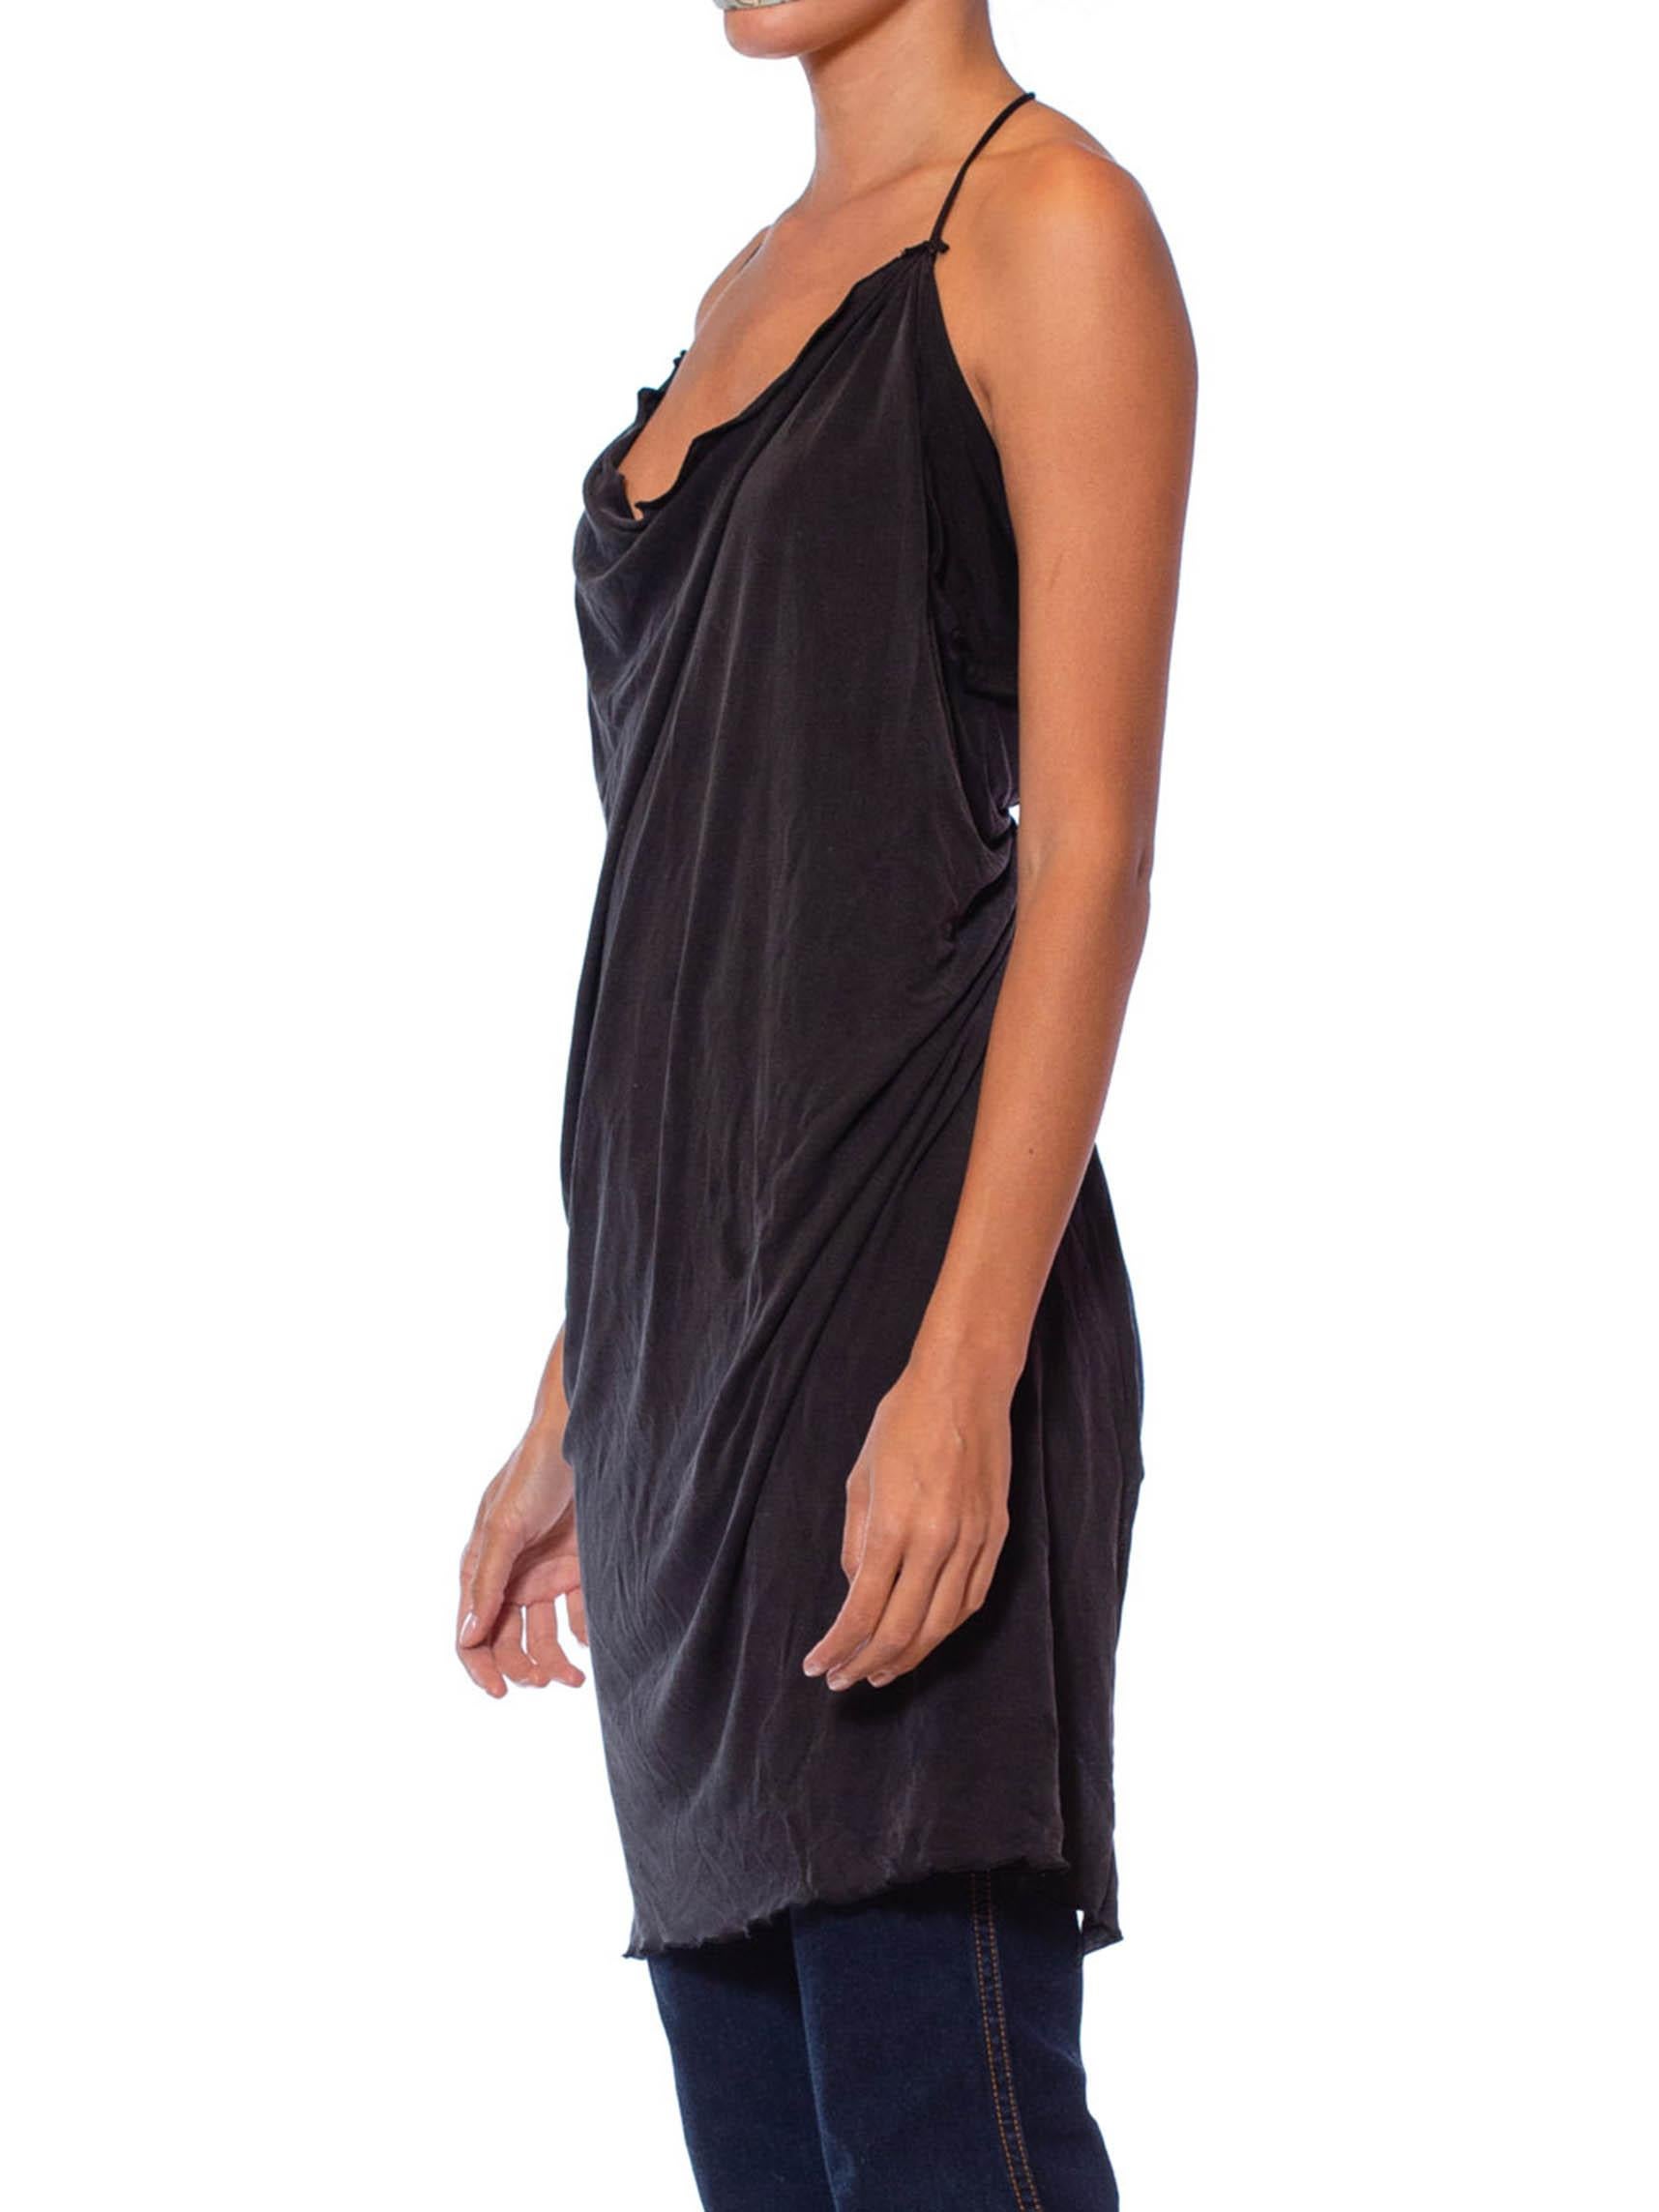 Women's 1990S Black Washed Silk Jersey Draped Camisole